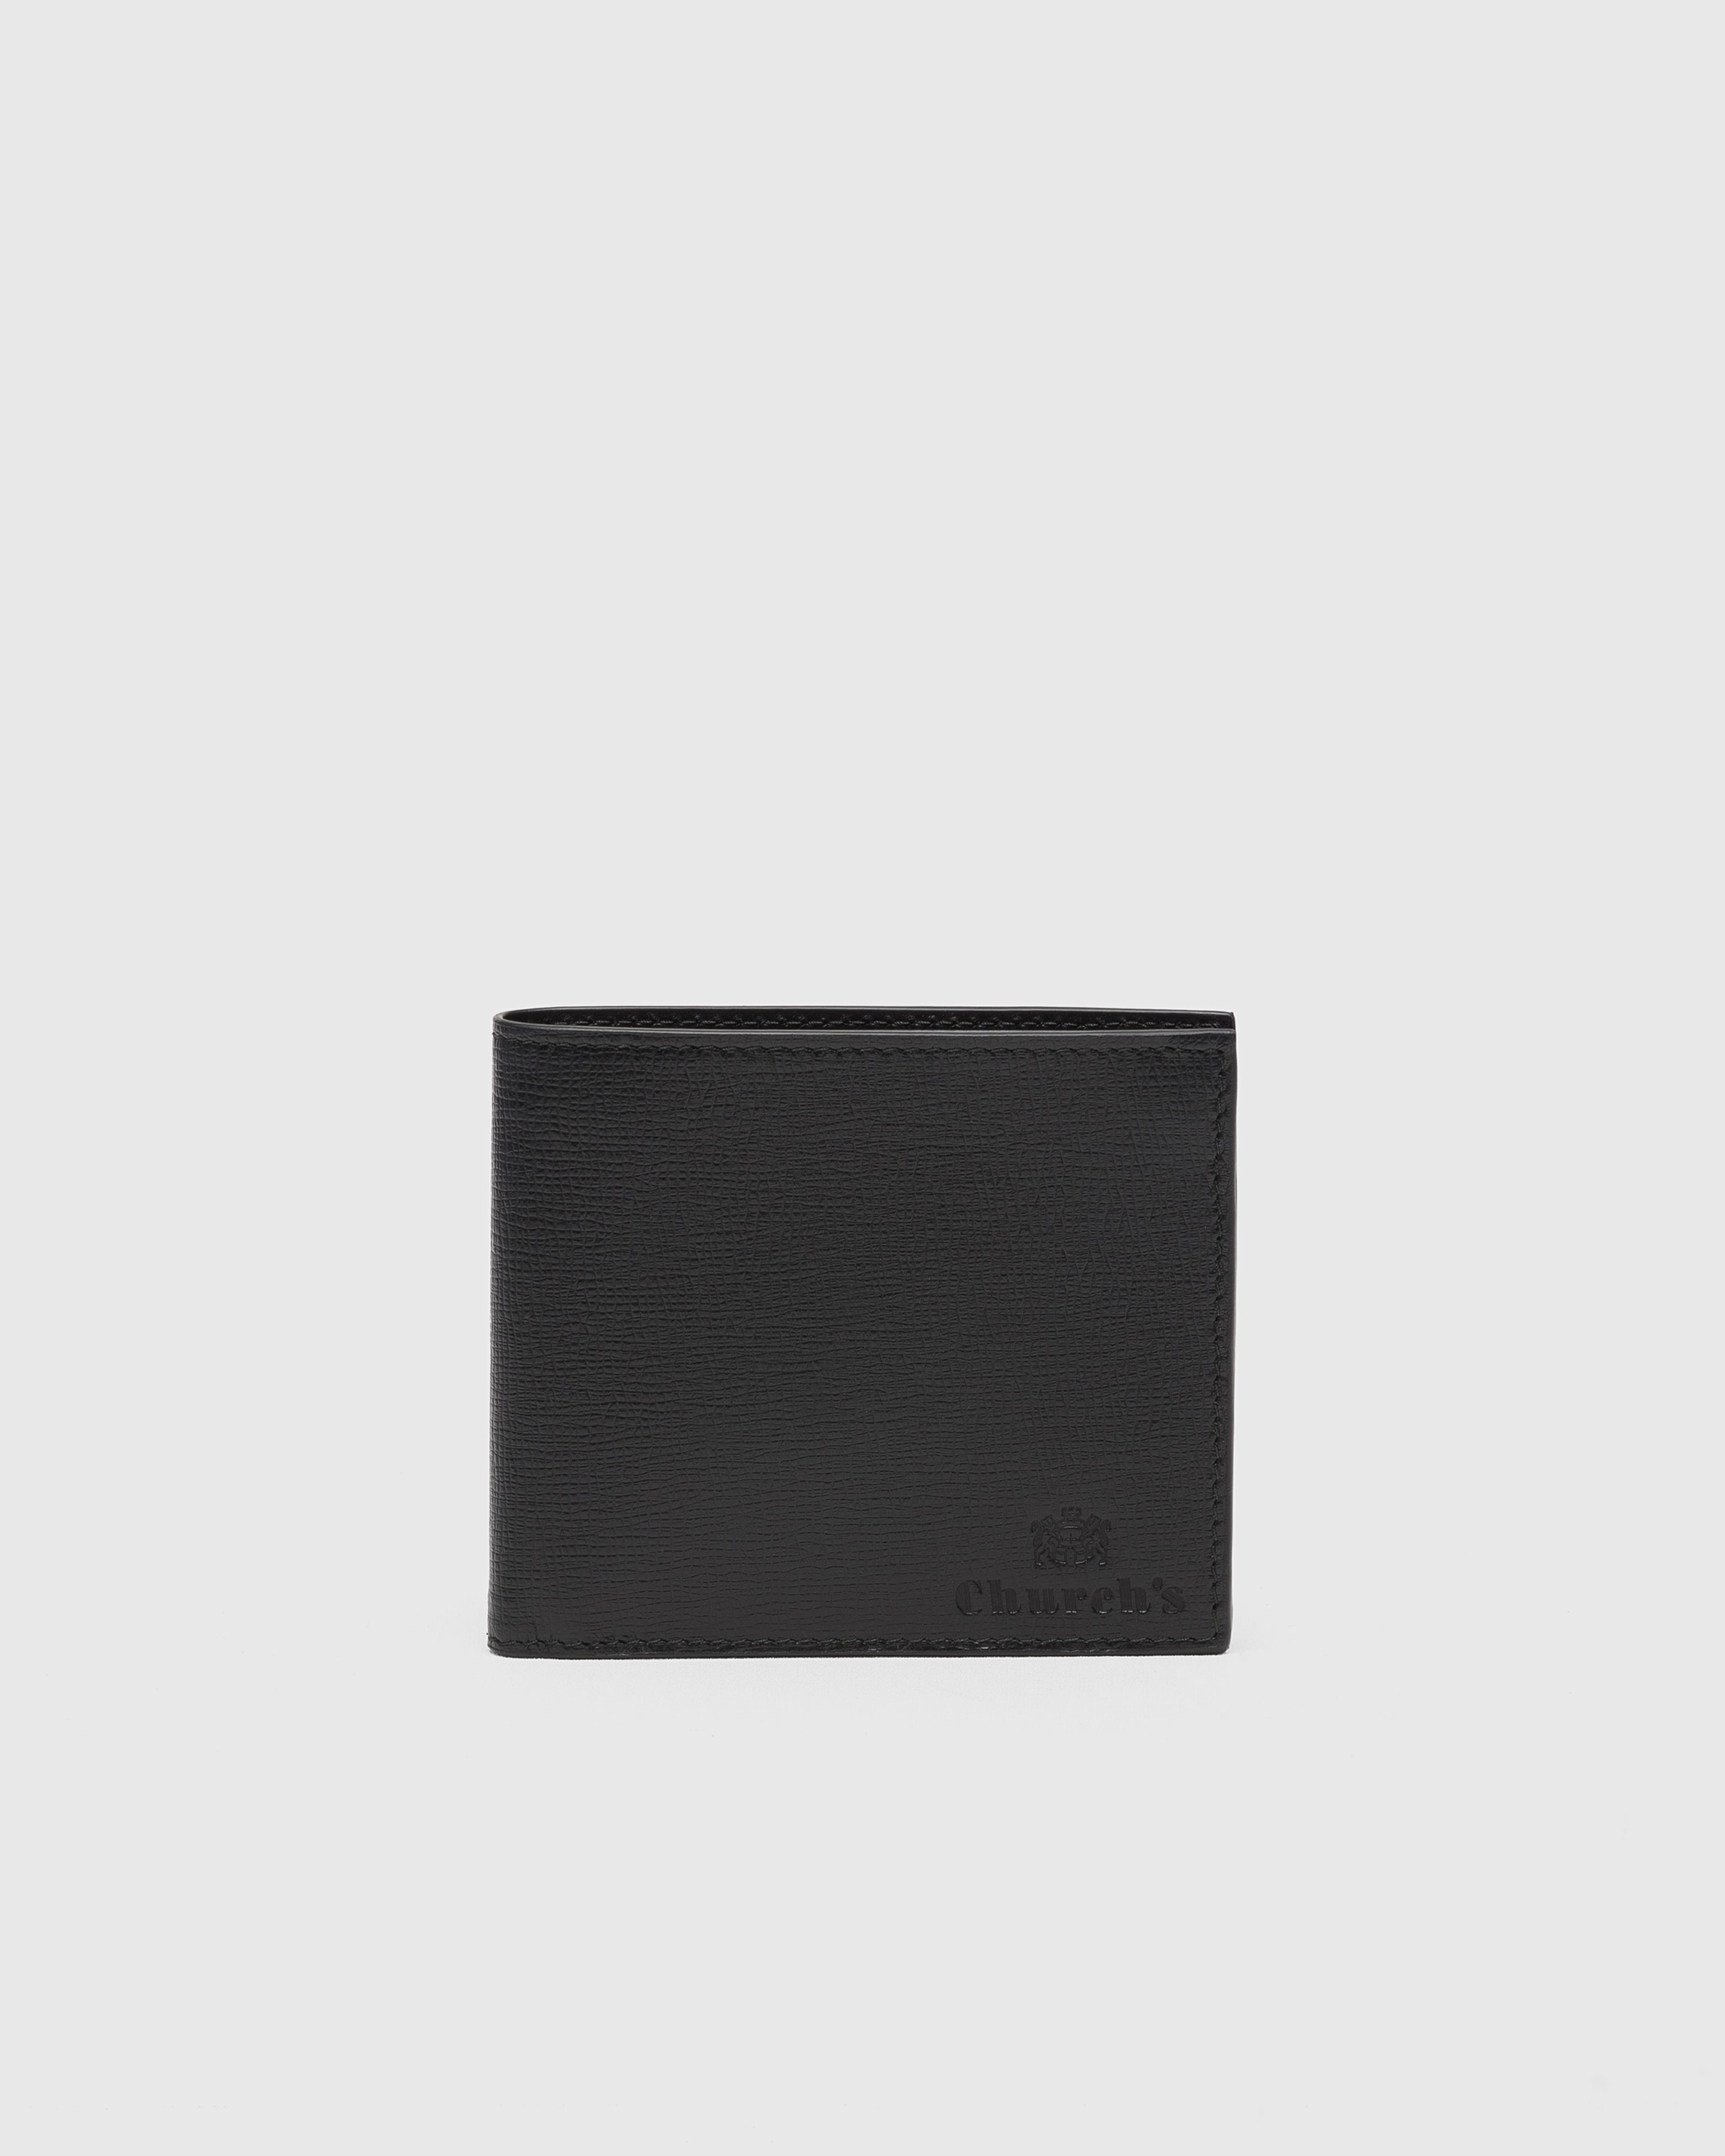 St James Leather 8 Card Wallet - 1